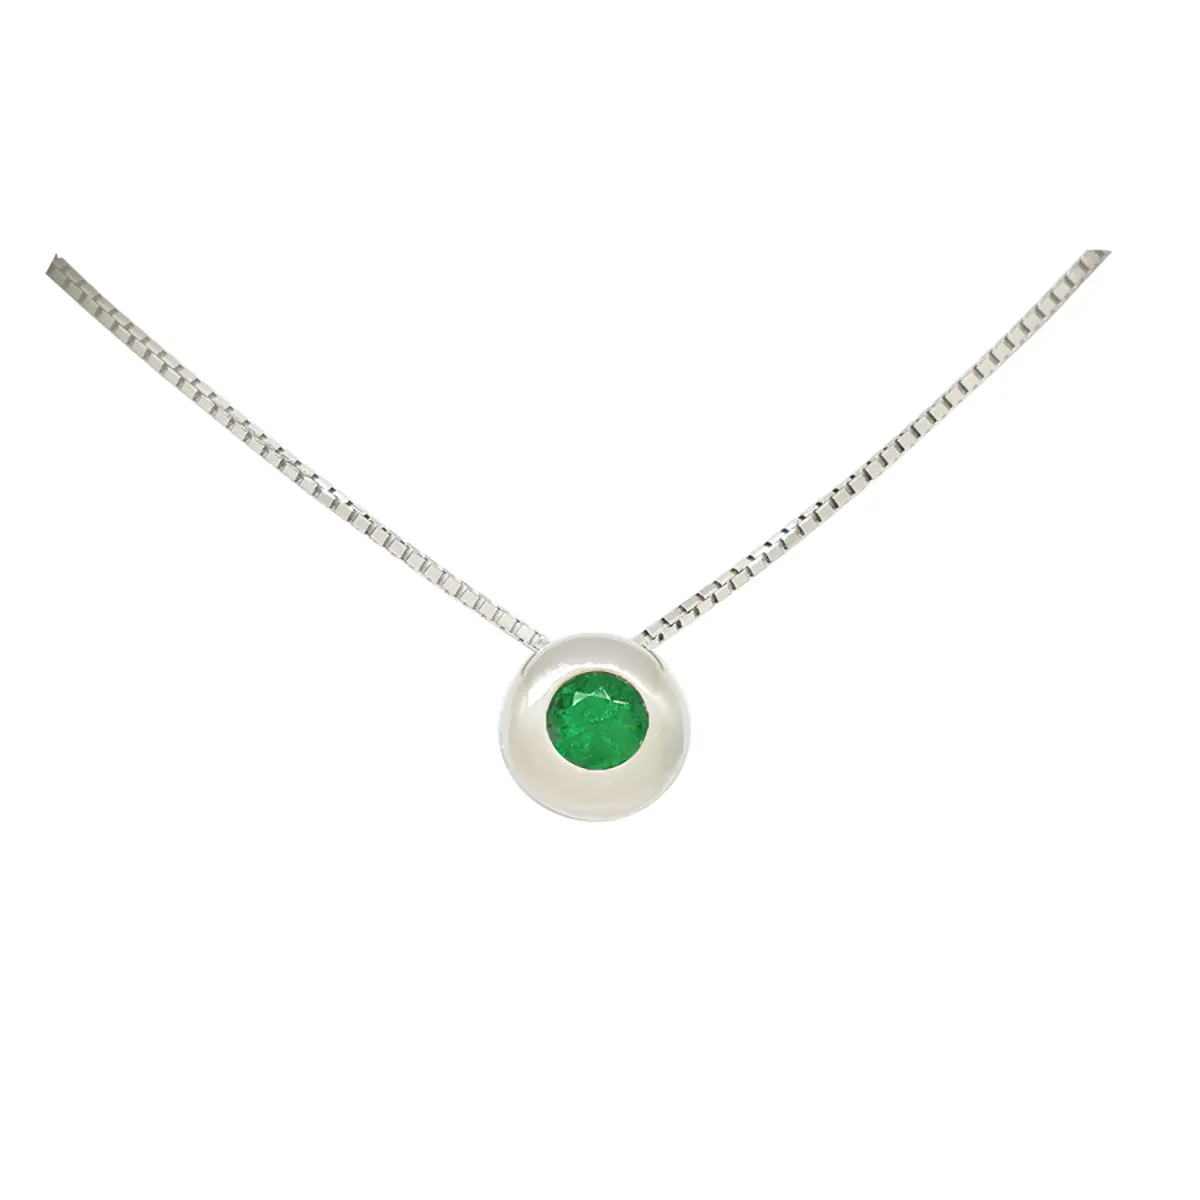 Solitaire Emerald Necklace in 18K White Gold with Round Emerald